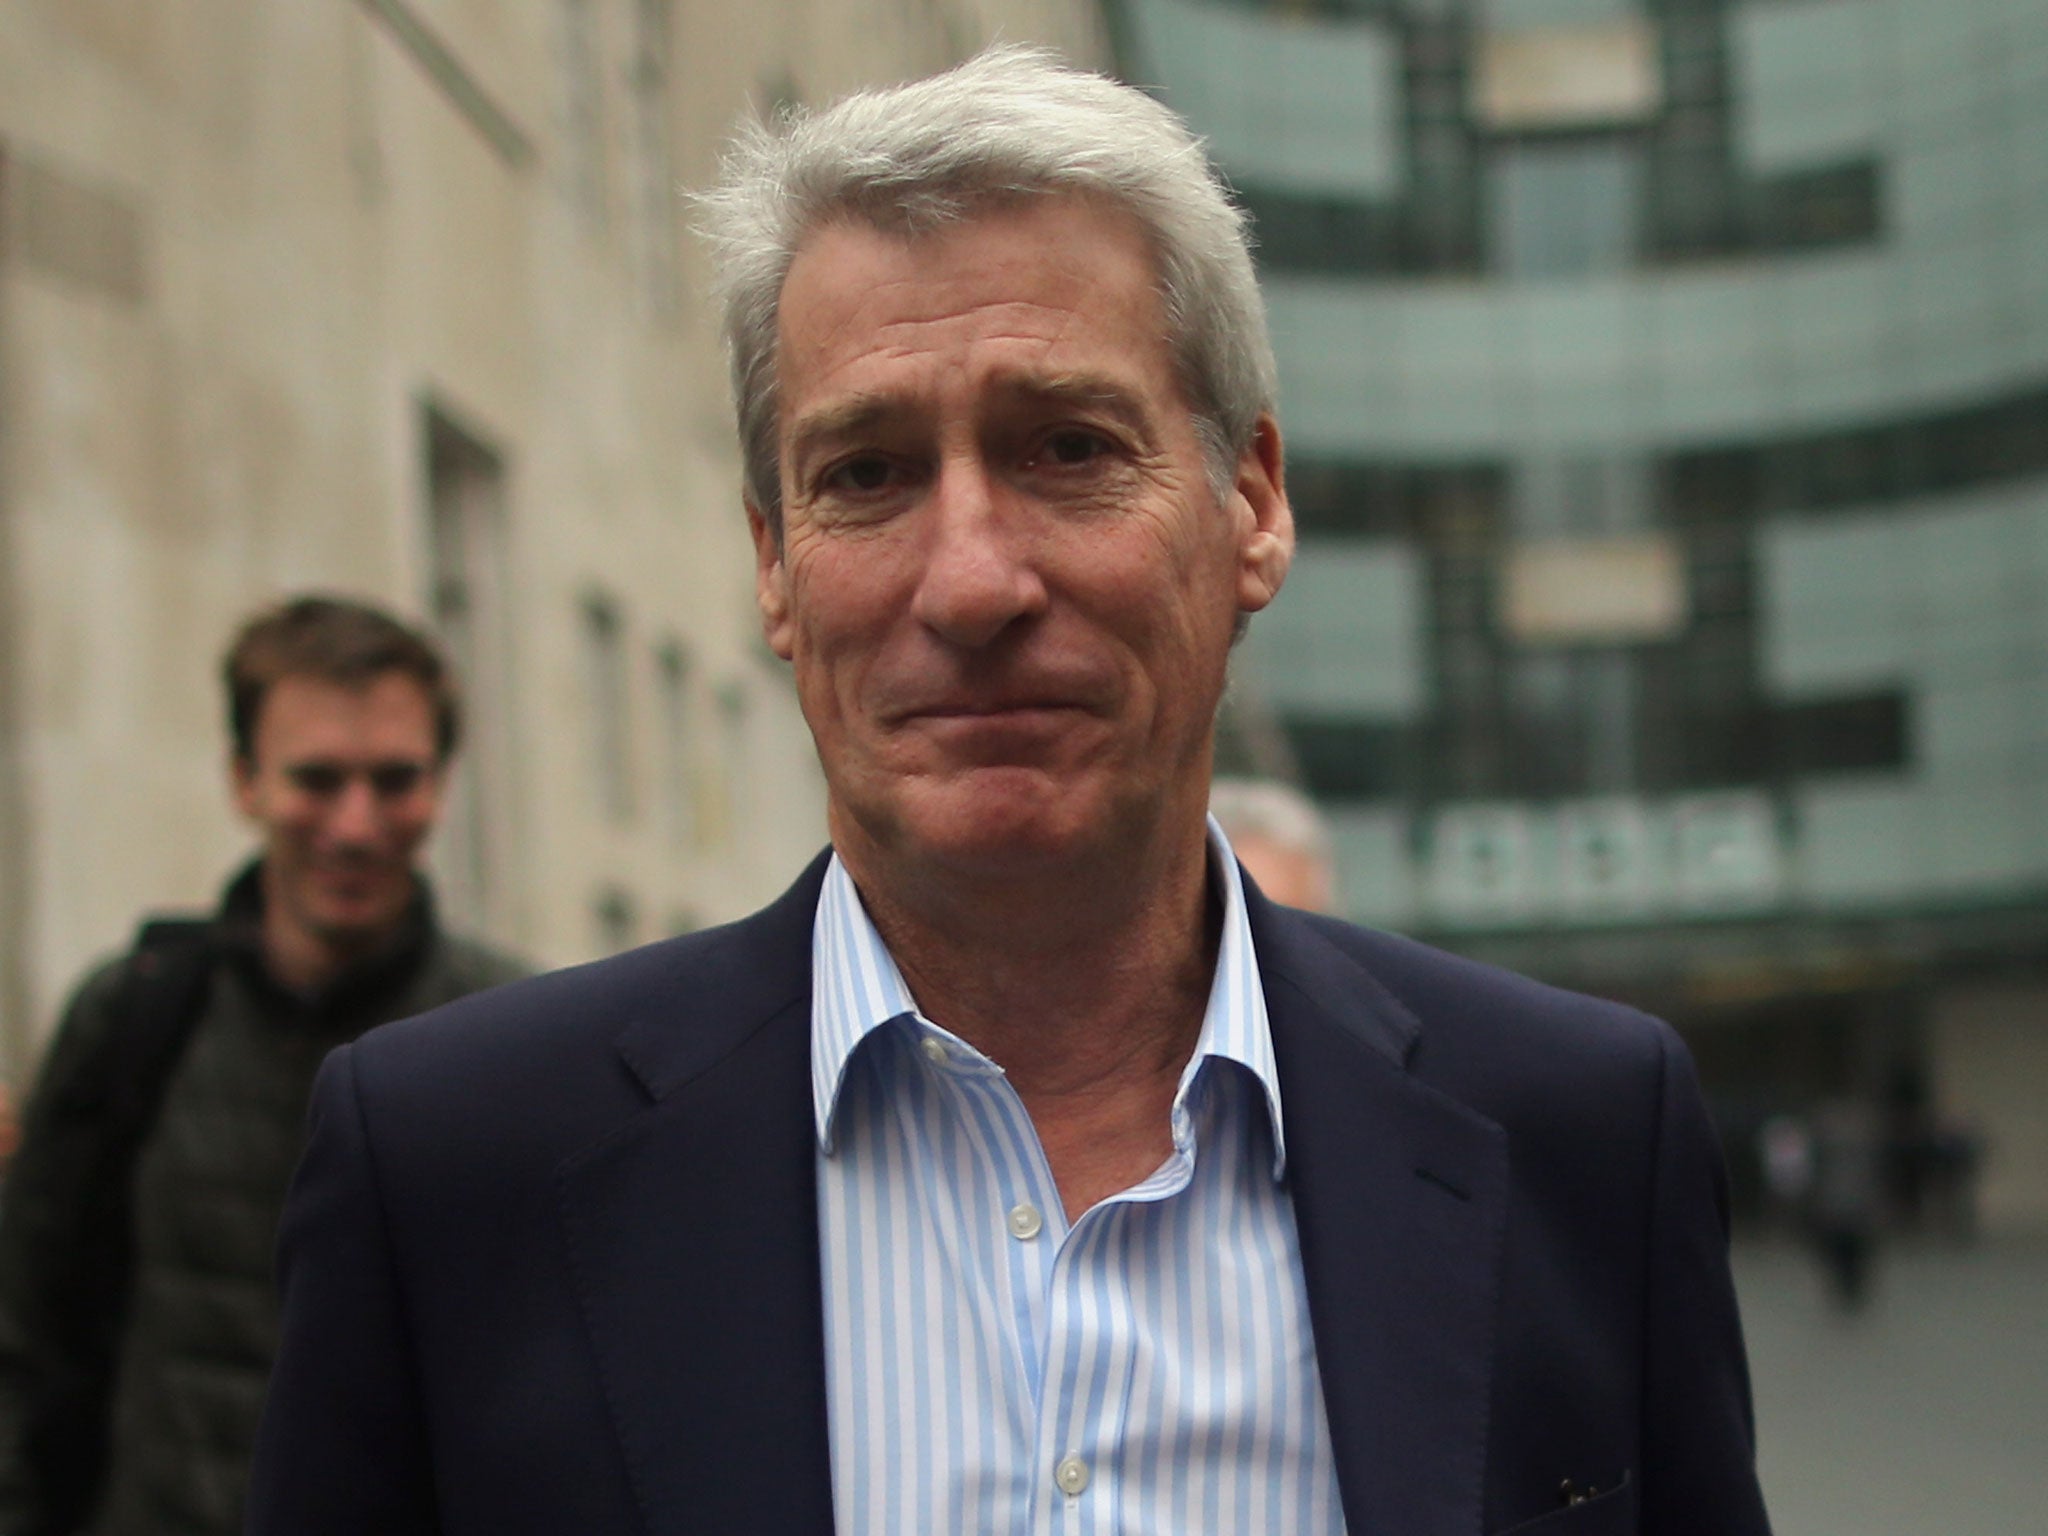 Jeremy Paxman’s private reservations over the EU have emerged from his public comments since quitting Newsnight